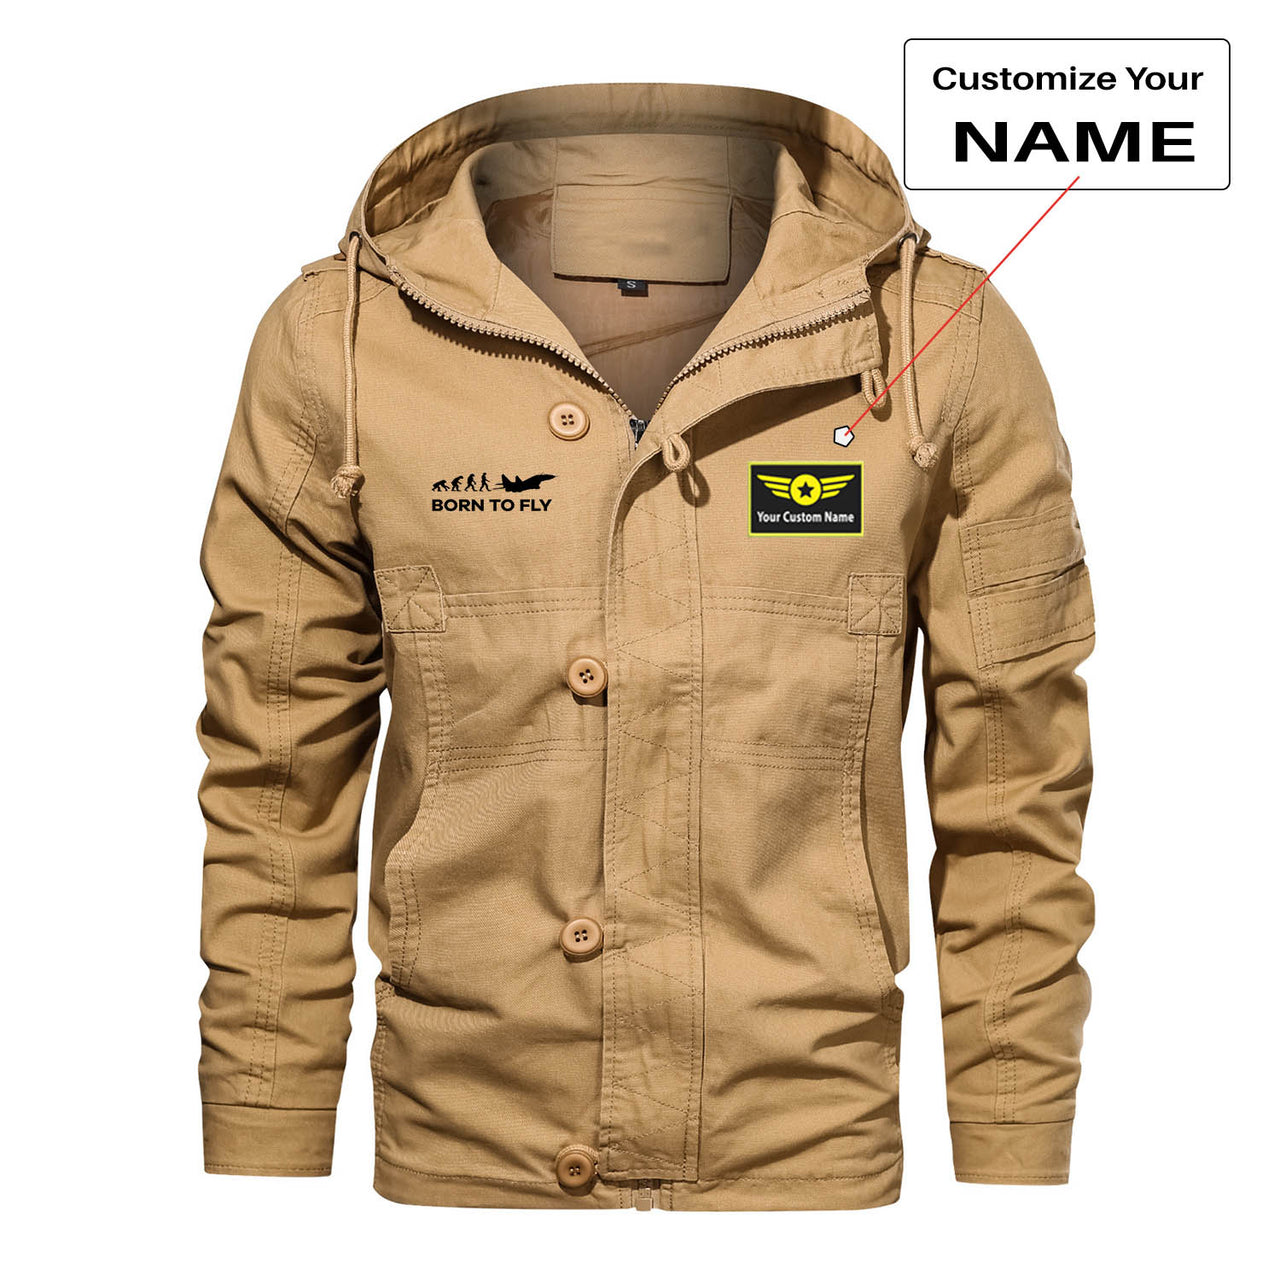 Born To Fly Military Designed Cotton Jackets